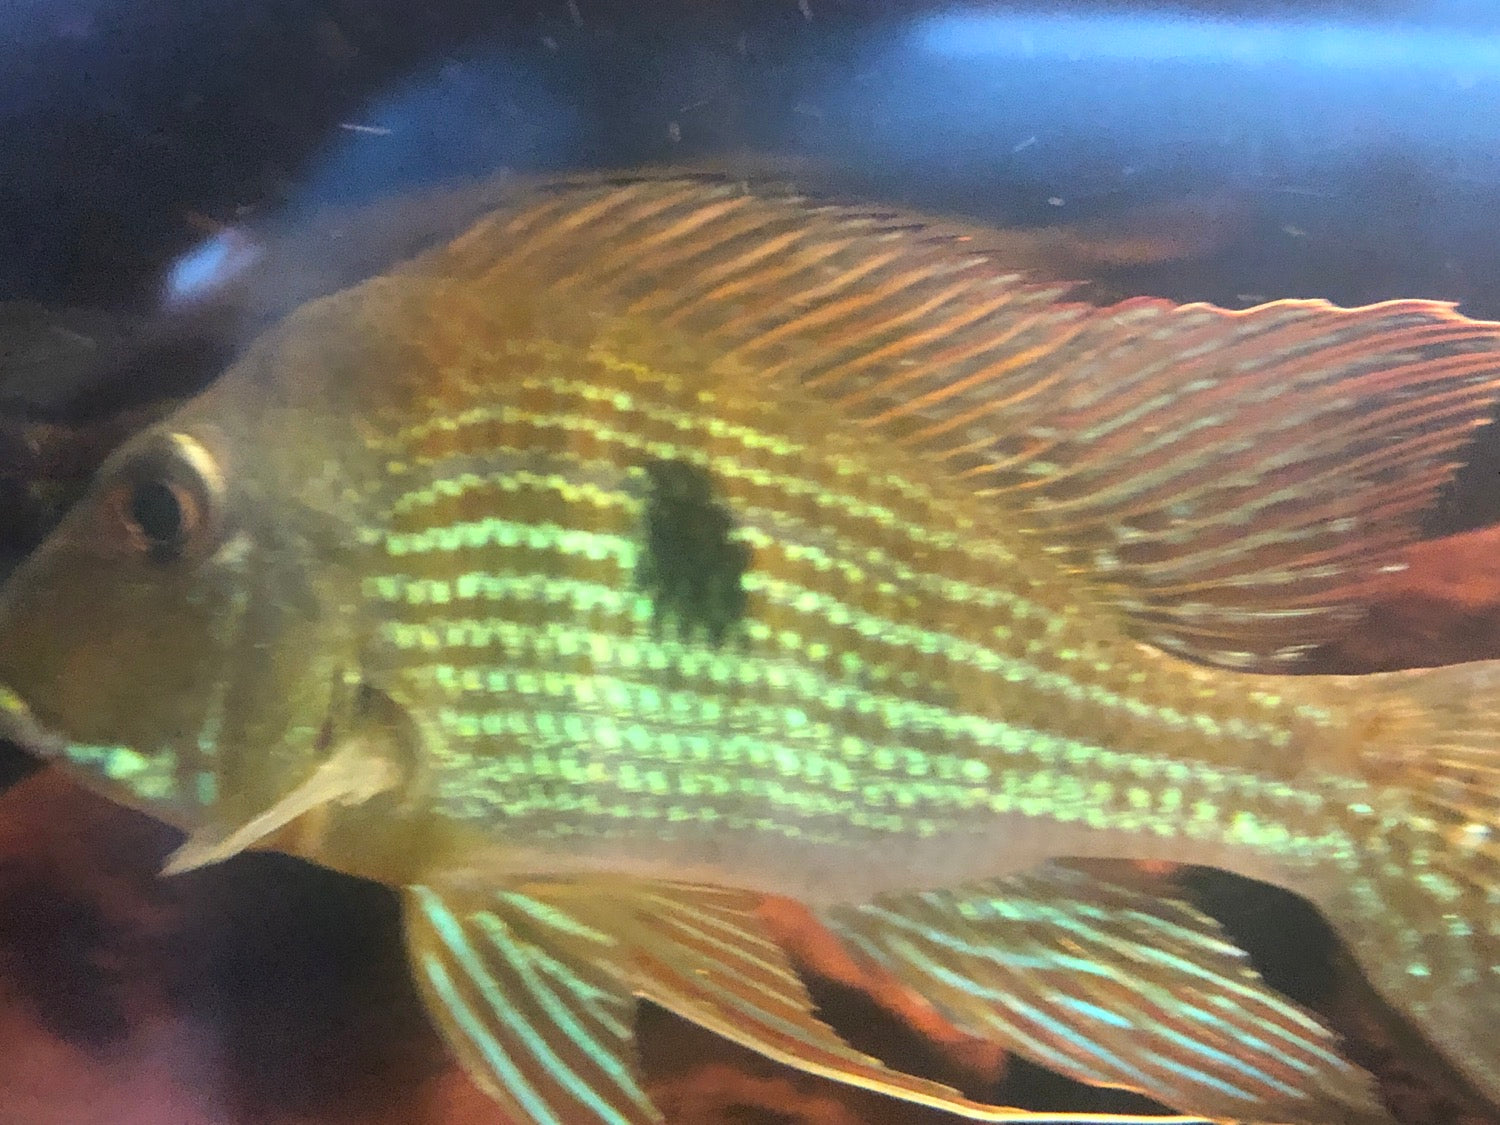 Red Striped Eartheater Cichlid (Geophagus surinamensis)